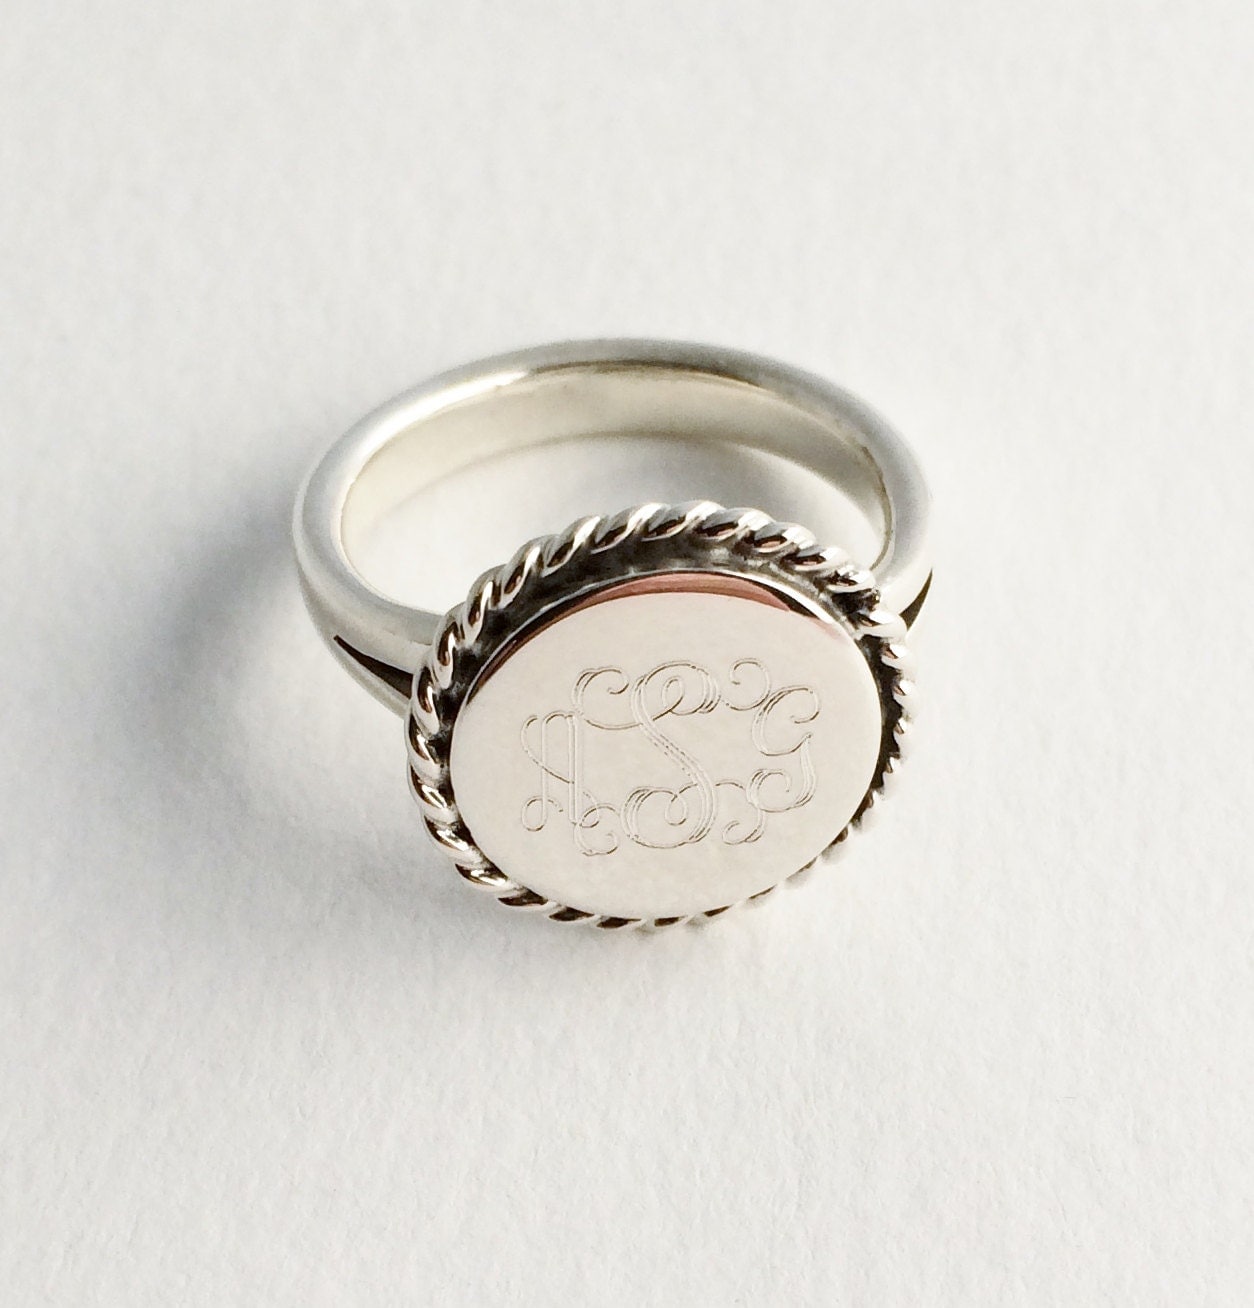 Nautical Rope Monogrammed Ring in Sterling Silver for Women or